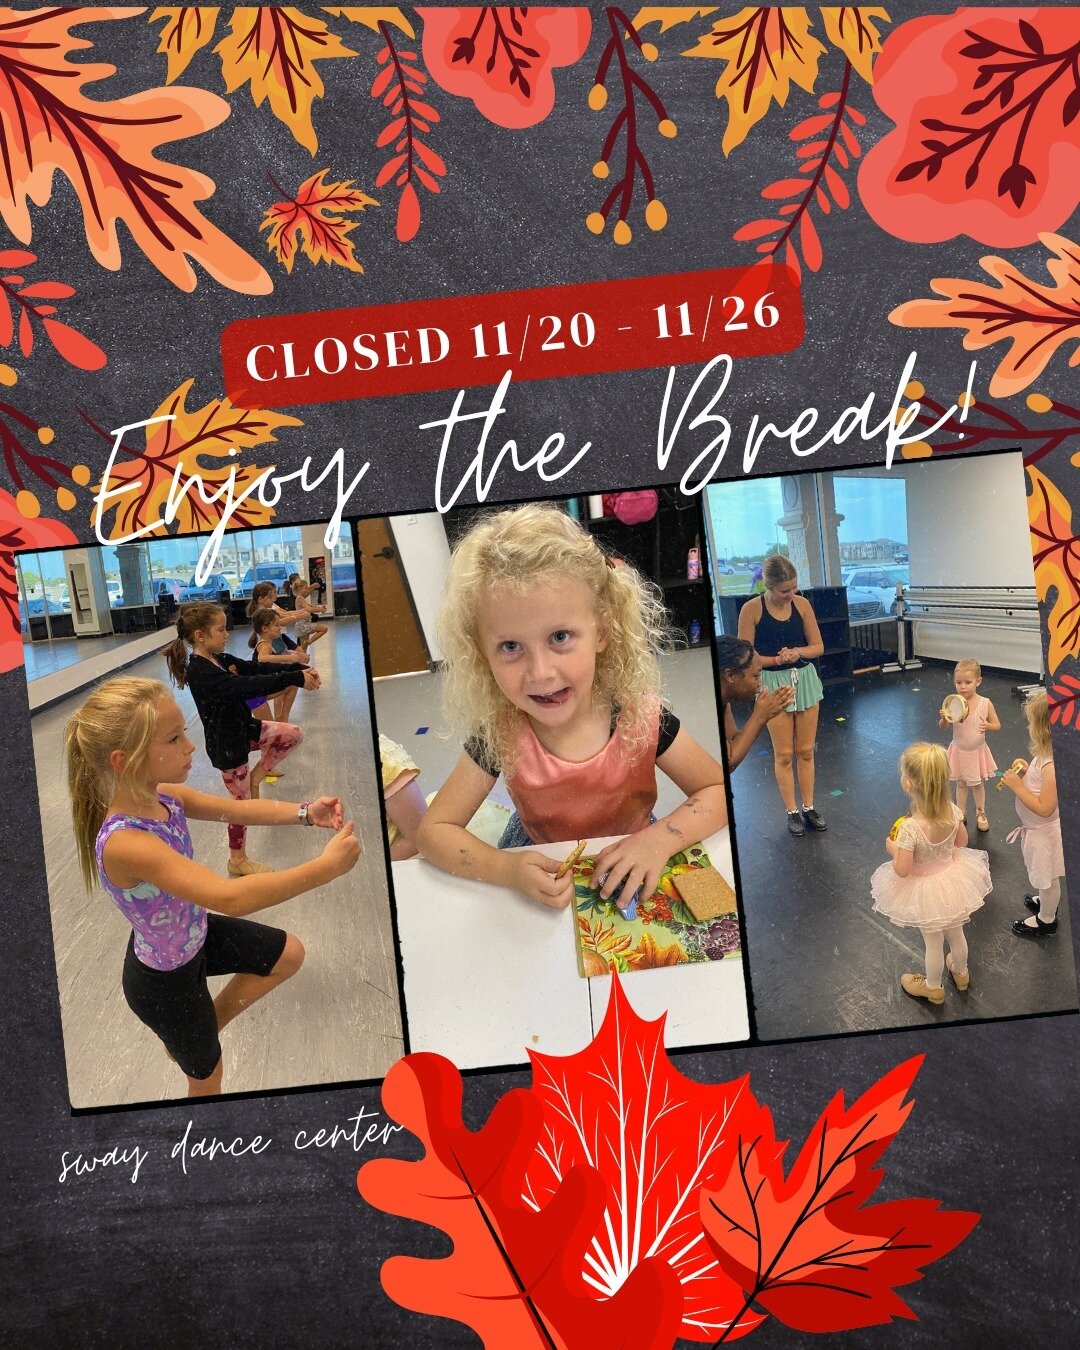 ENJOY THE BREAK! 🙌🍂

Sway is closed all week for the holiday! Rest up and we'll see you in the studio on Monday, November 27th! ❤️